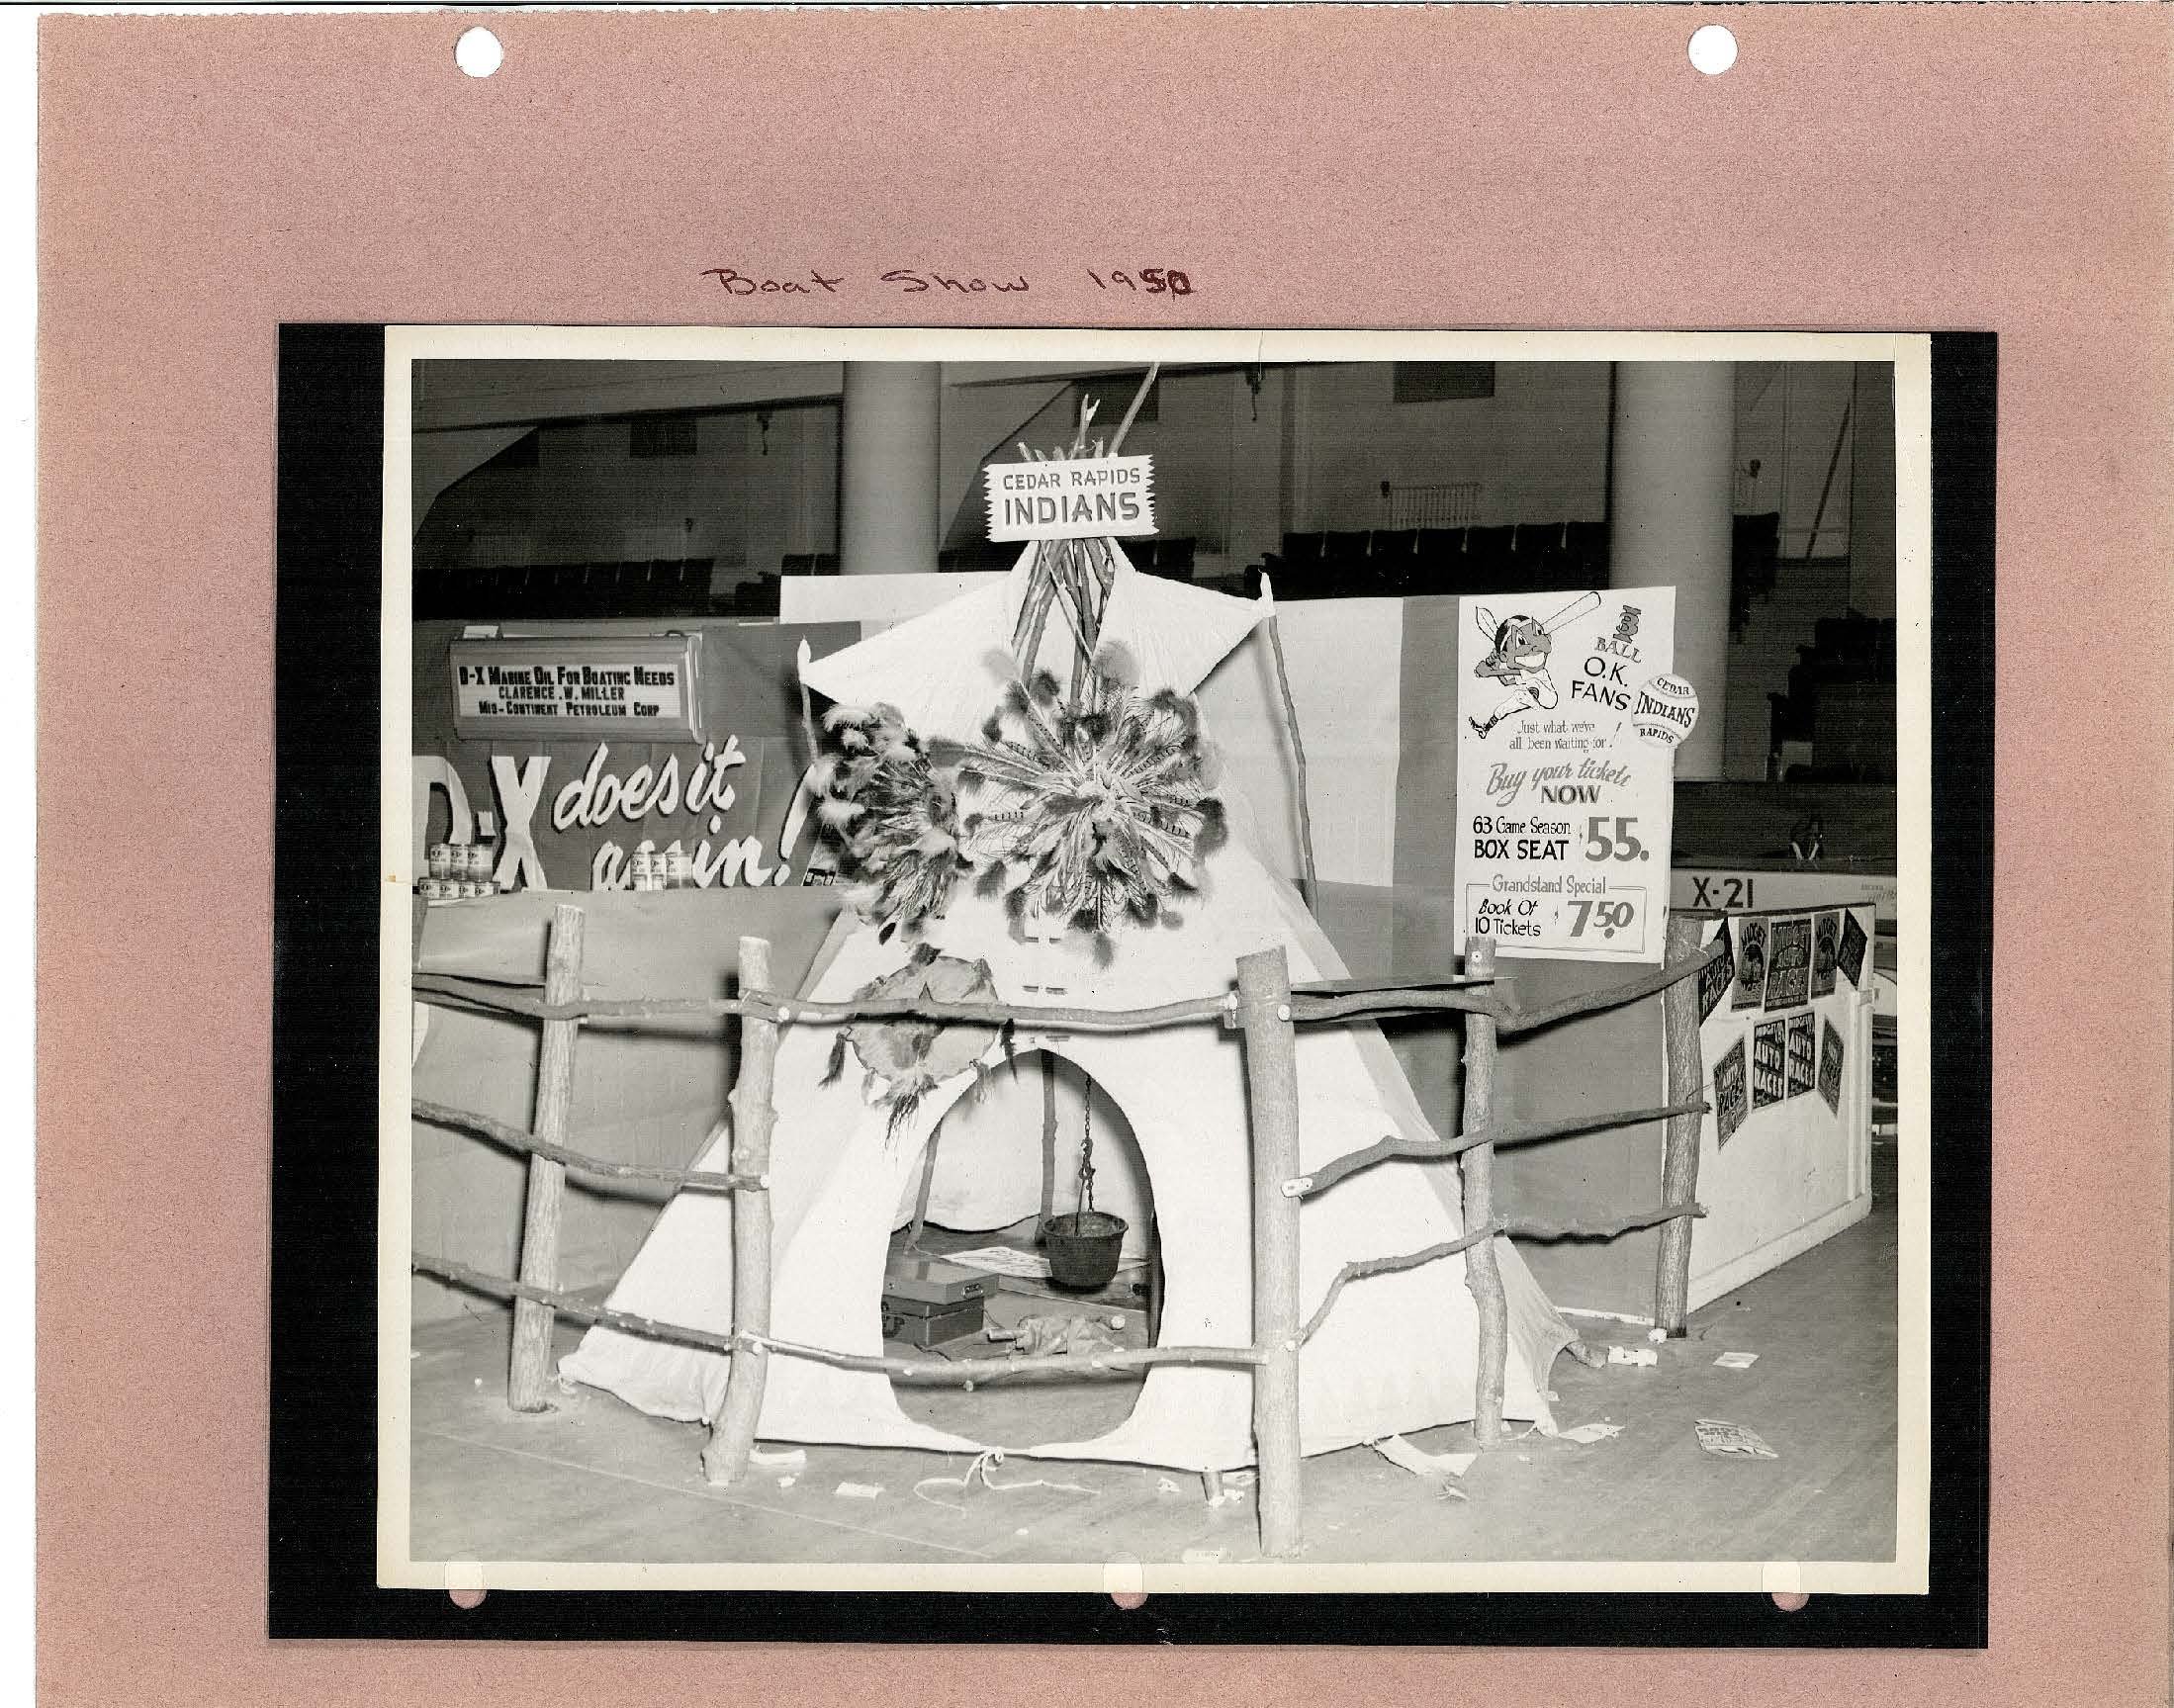 Photo taken at Boat show 1950 of Indians booth